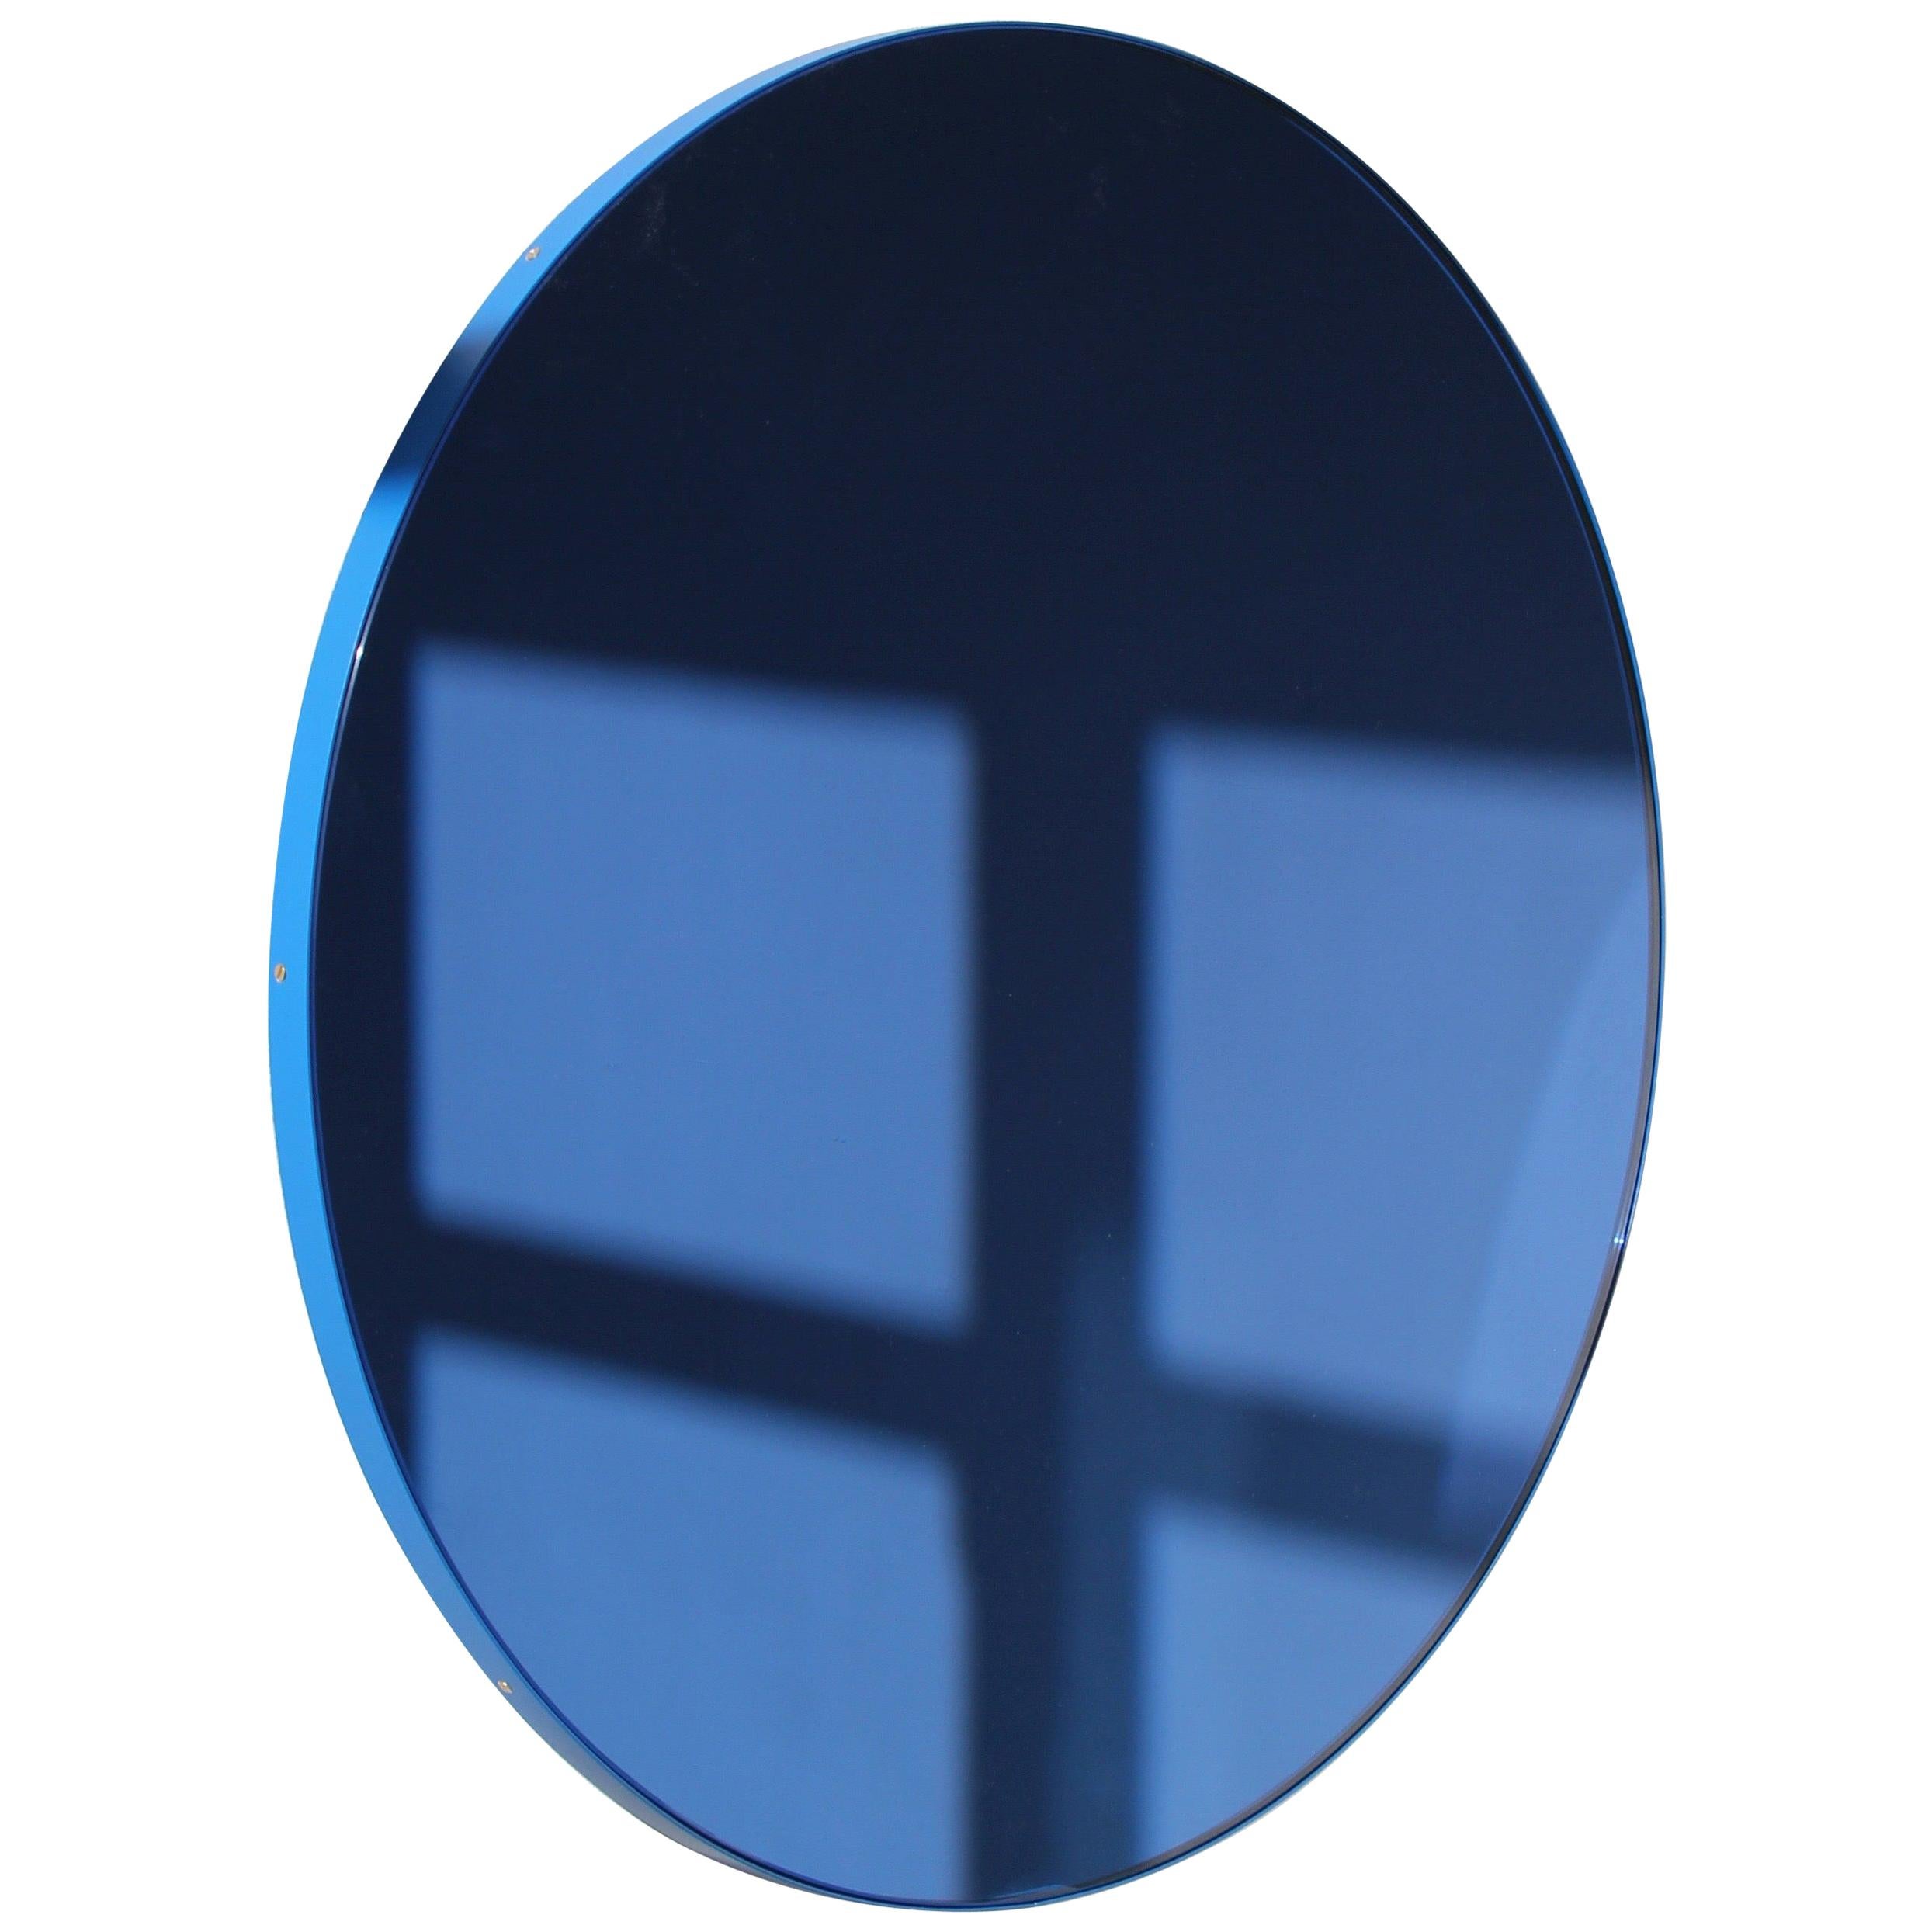 Orbis Round Blue Tinted Contemporary Mirror with Blue Frame, Regular For Sale